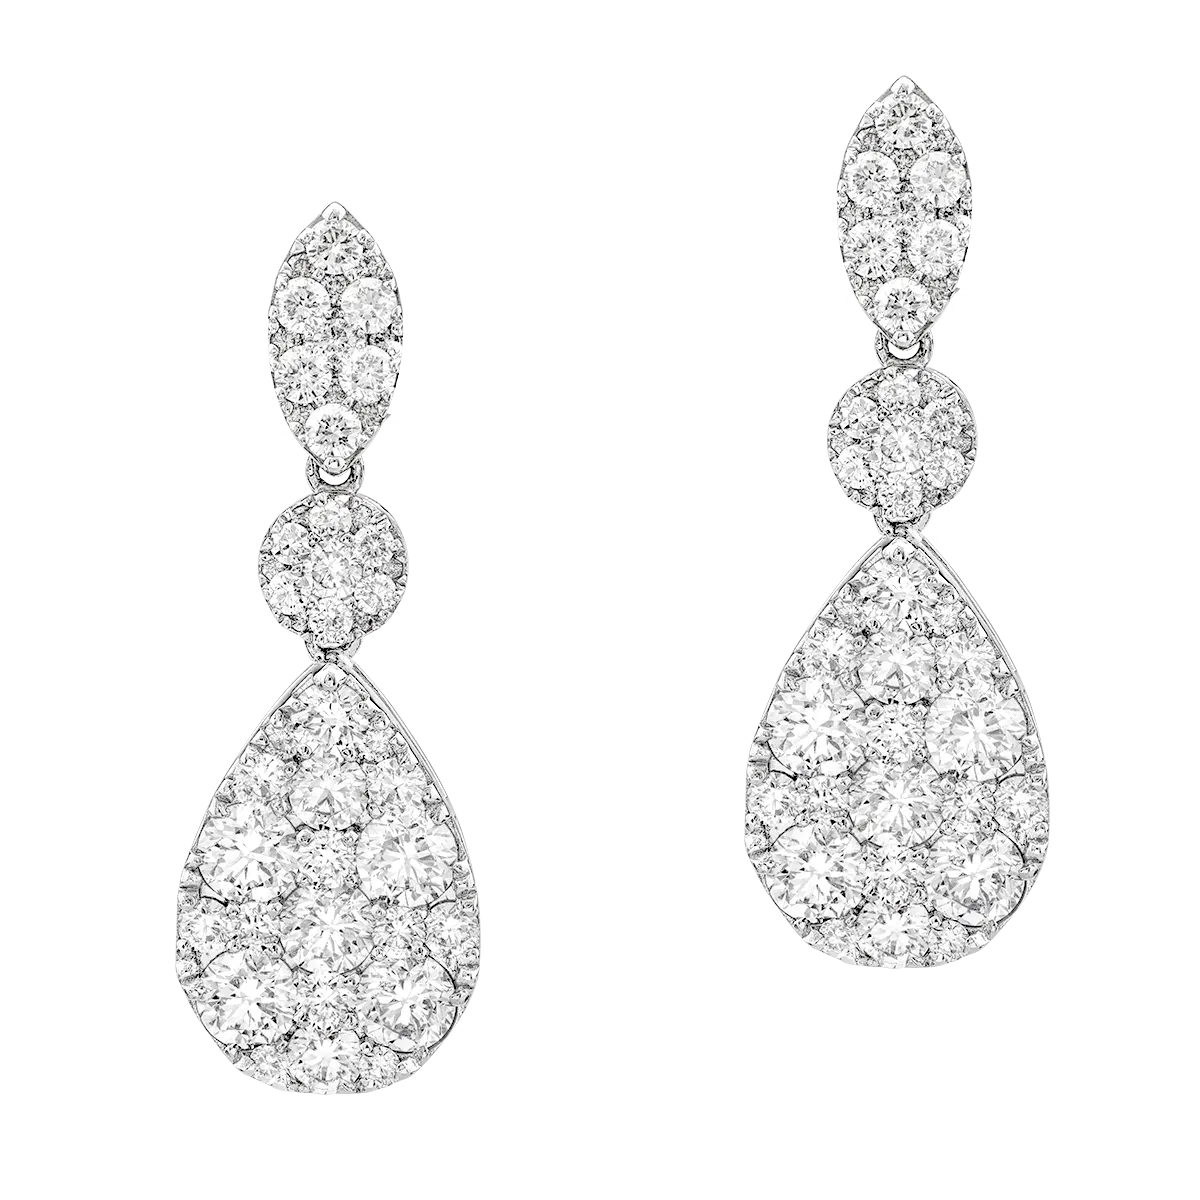 18K white gold earrings with 3.35ct diamonds